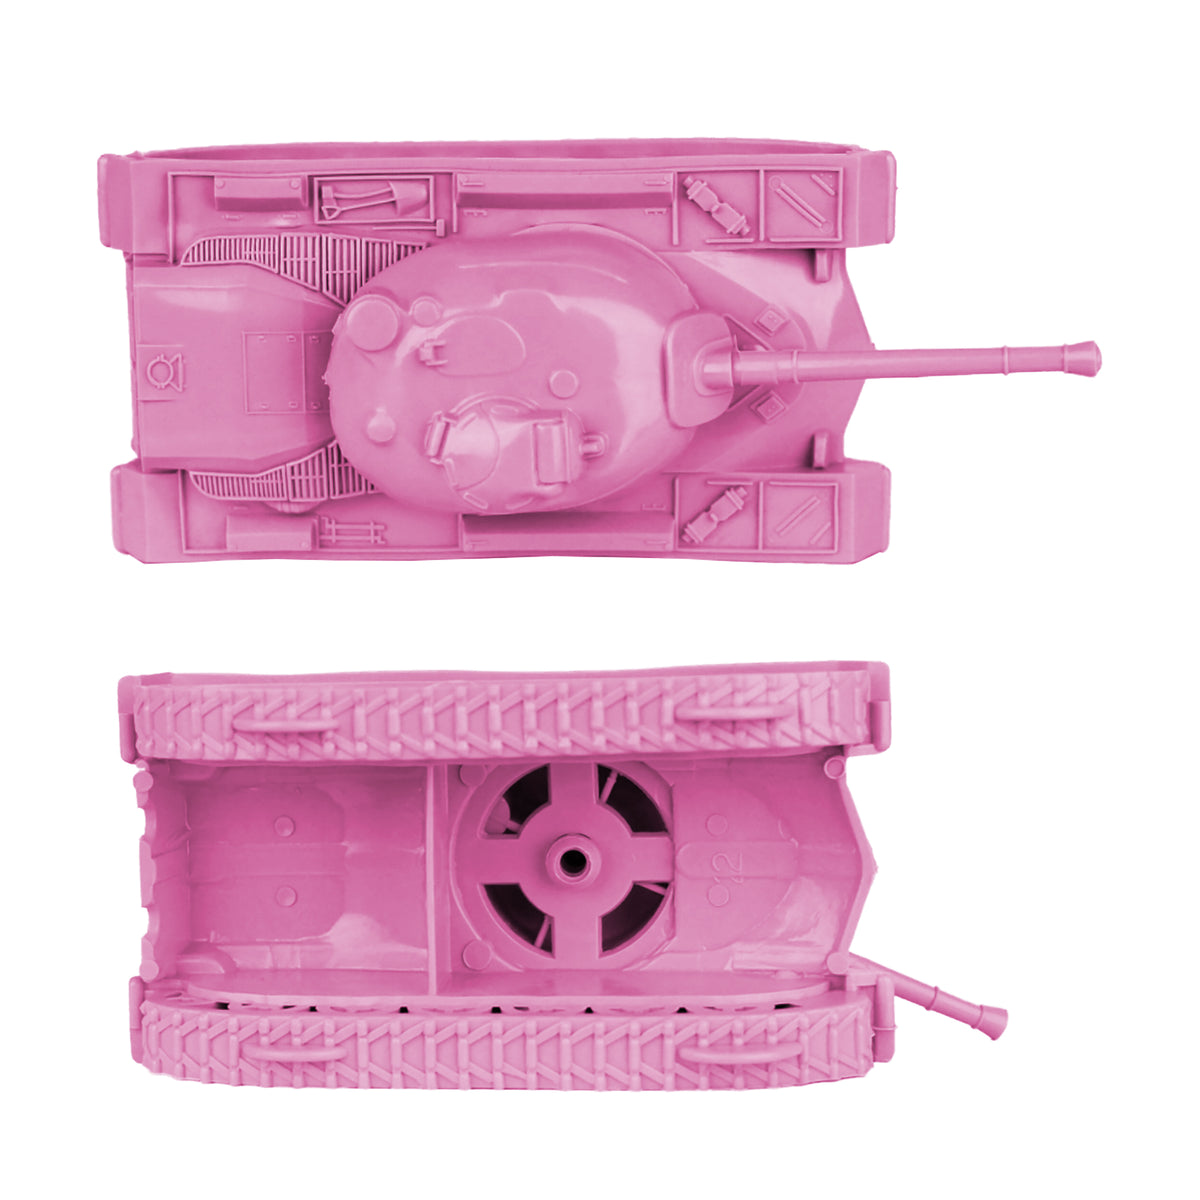 TimMee Toy Tanks for Plastic Army Men - Pink WW2 3pc - Made in USA